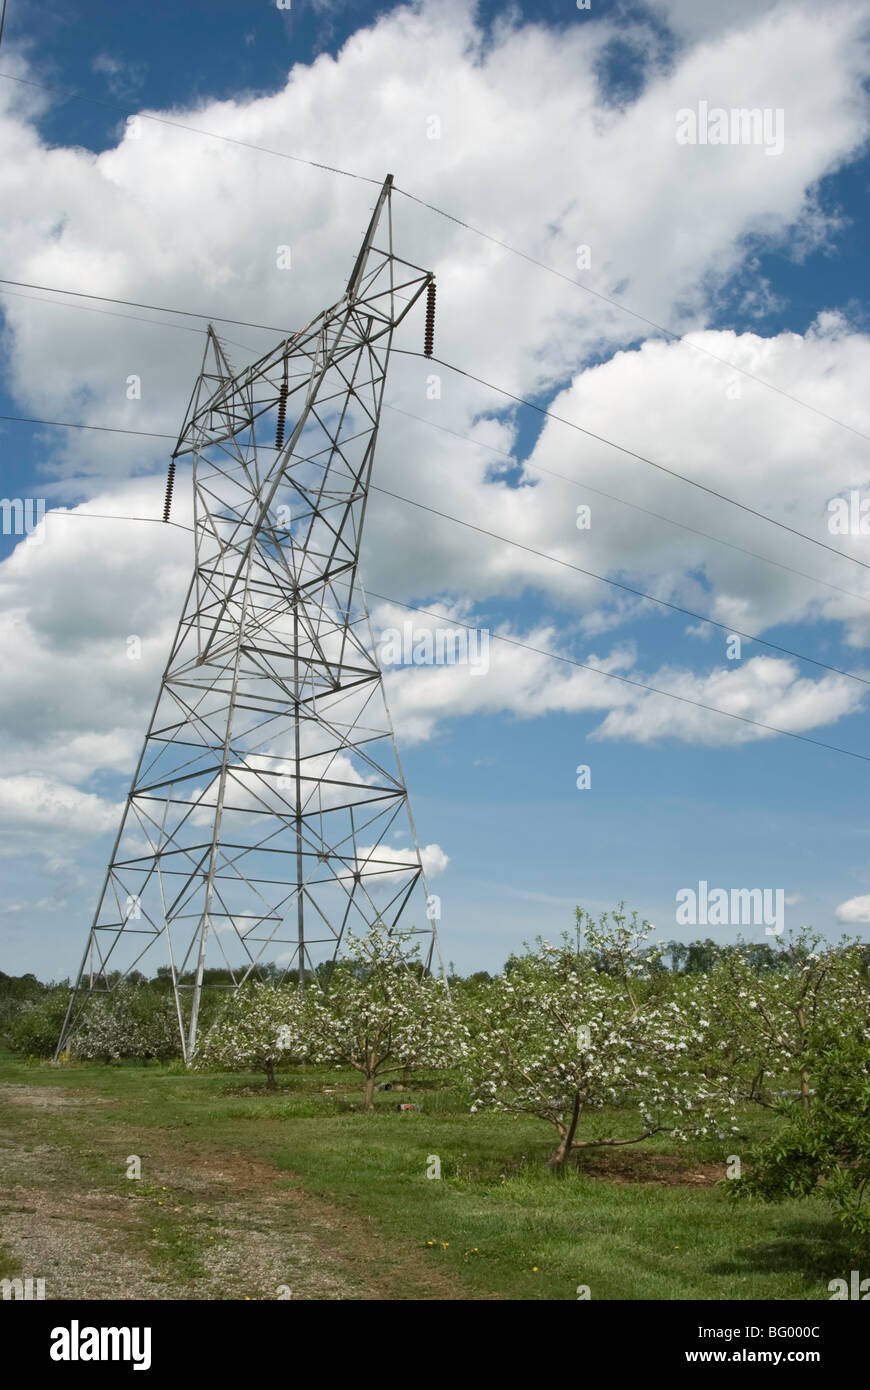 High tension electrical distribution lines set in a spring apple orchard with blossoms, Pennsylvania, USA. Stock Photo